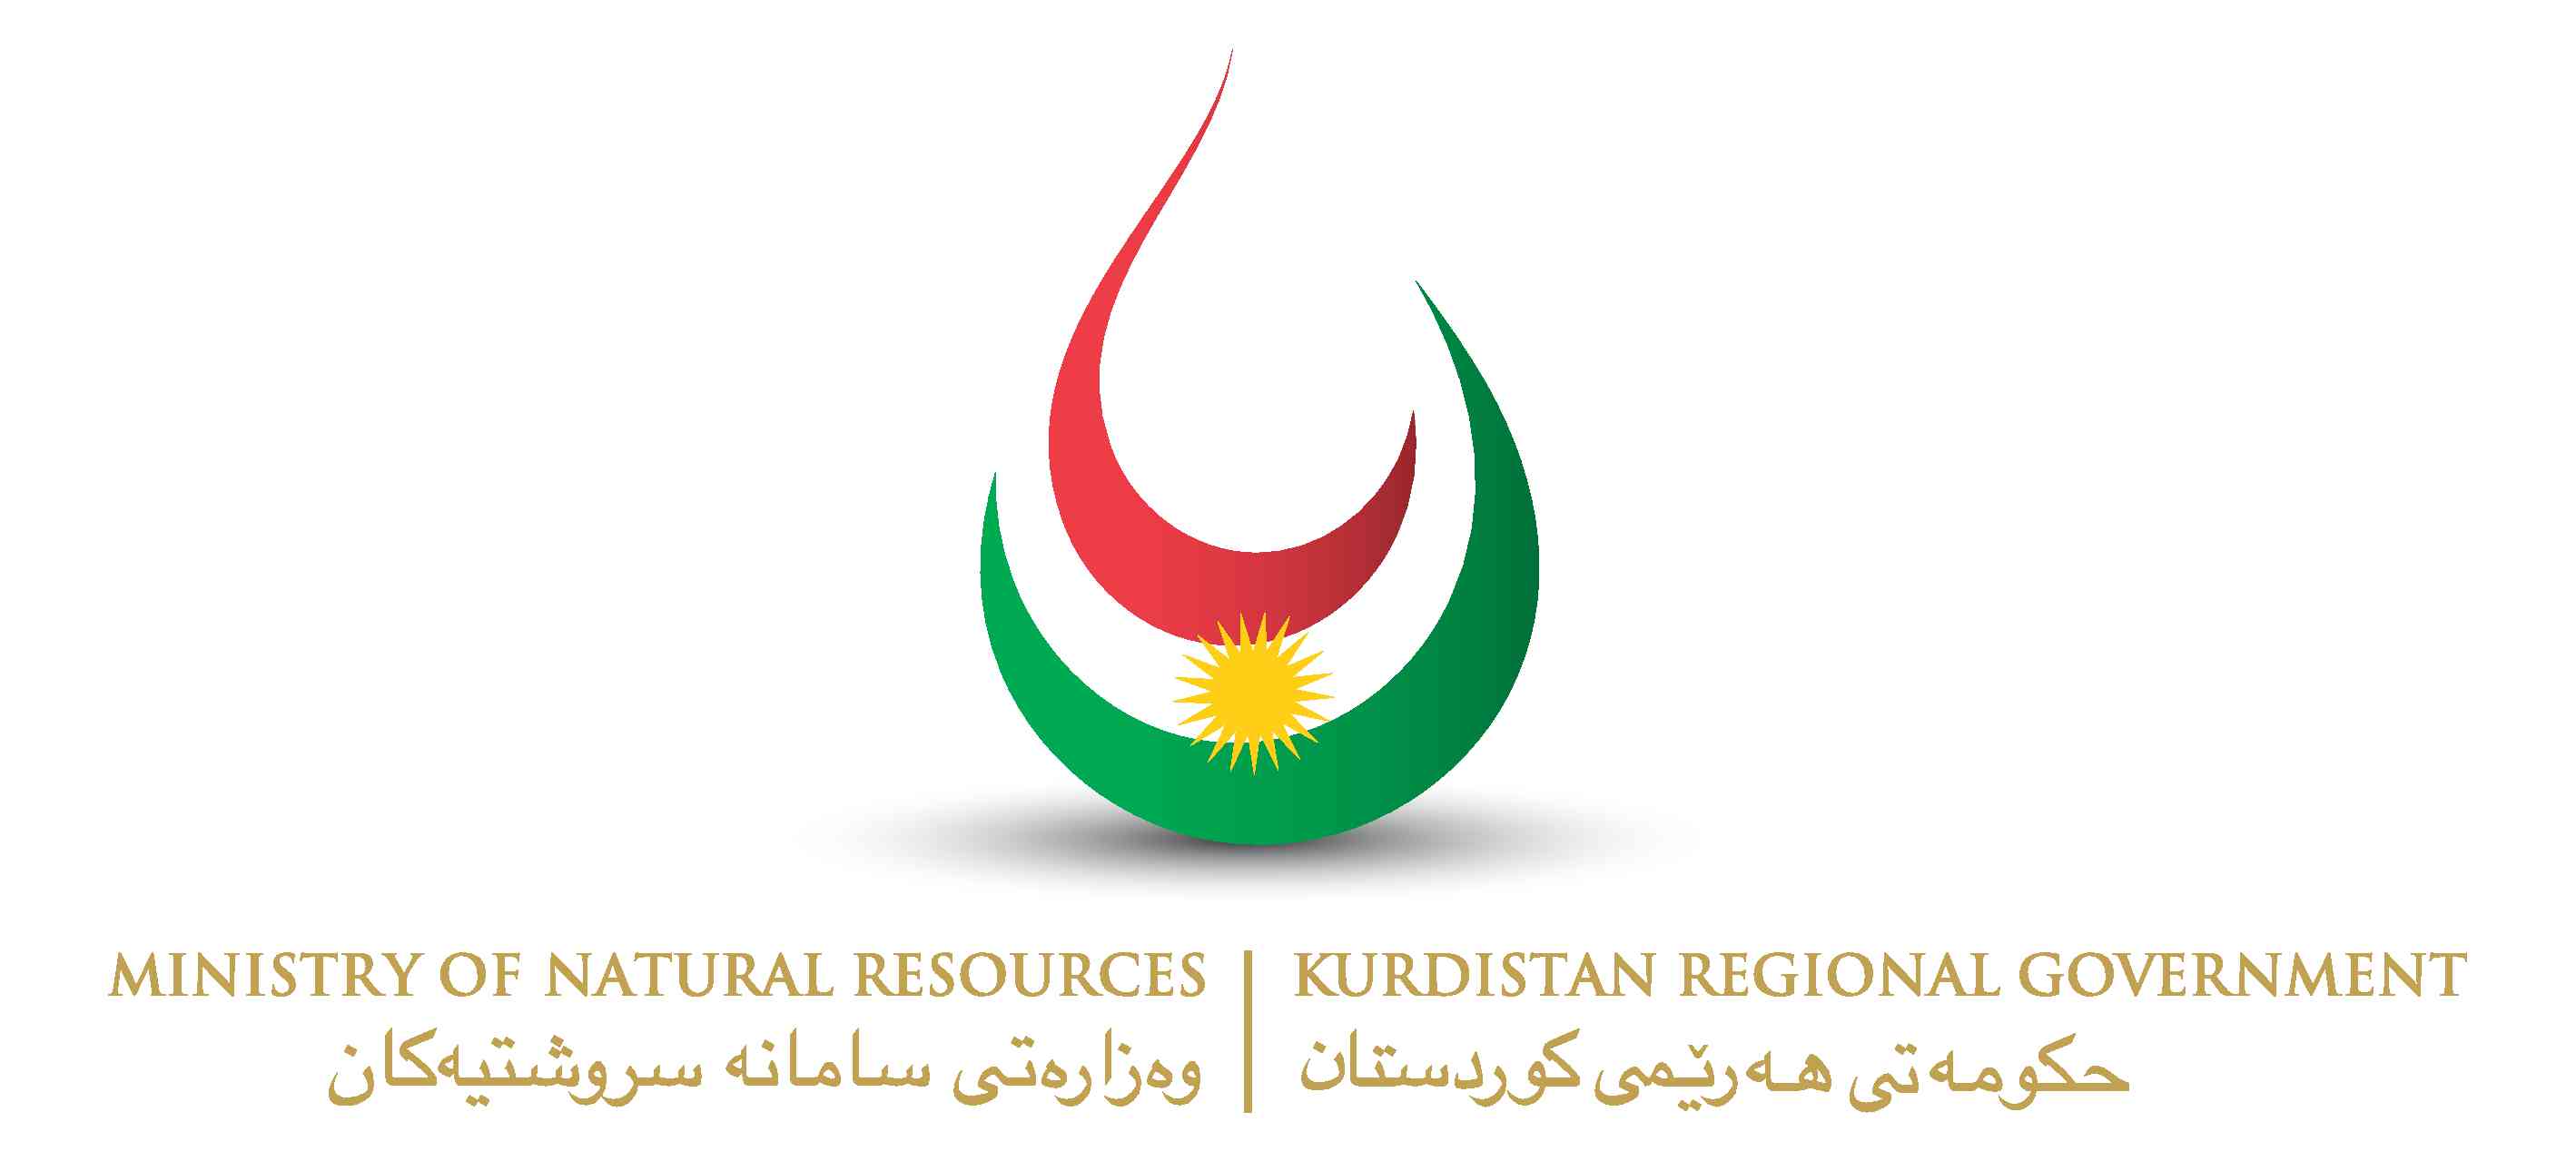 Draw Media- Statement by the ministry of natural resources of KRG